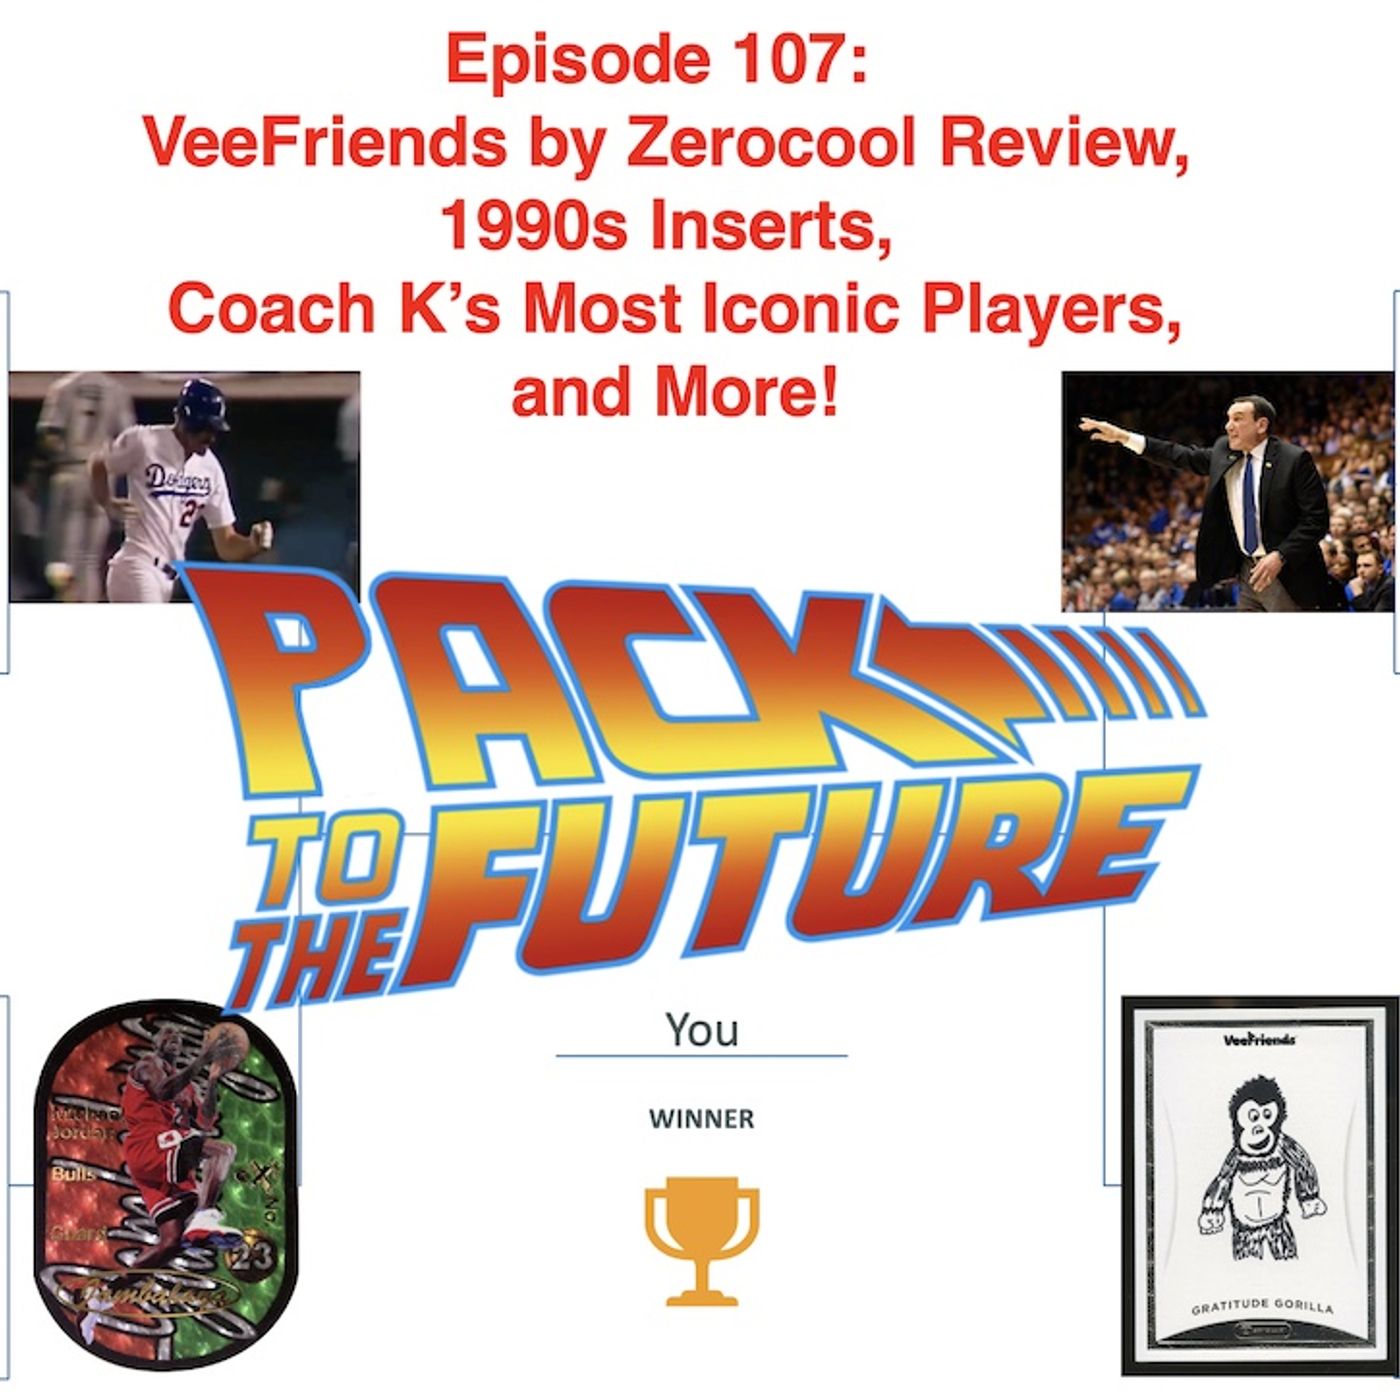 Episode 107: VeeFriends by Zerocool Review, 1990s Inserts March Madness, Coach K’s Most Iconic Players, and More!